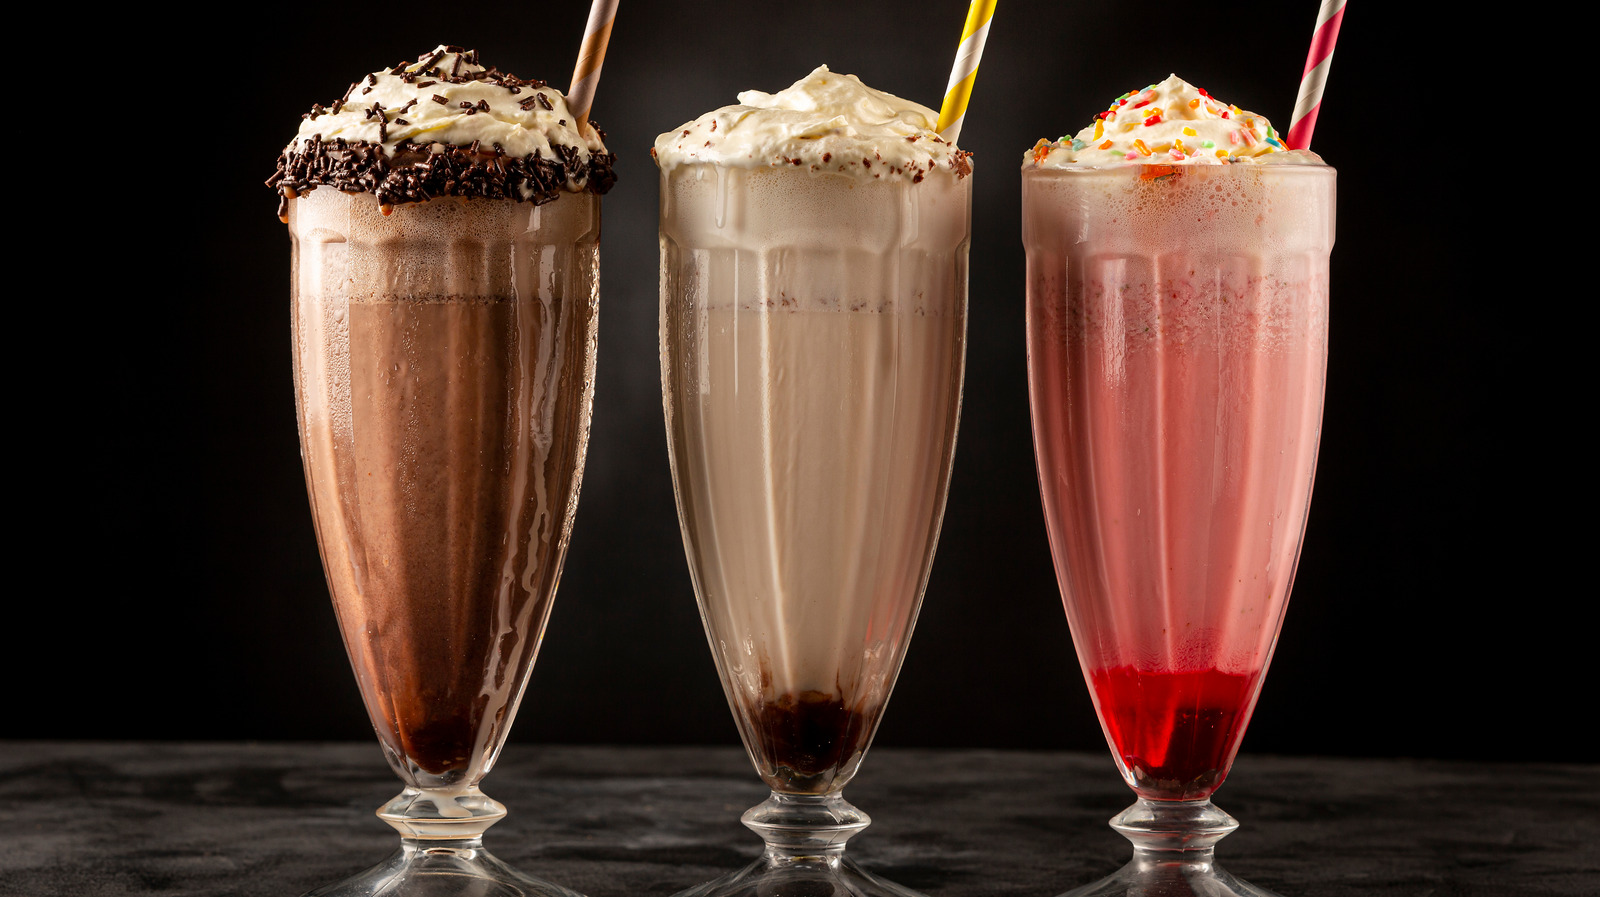 Ihop Just Brought Back A Popular Special Dedicated To Milkshakes